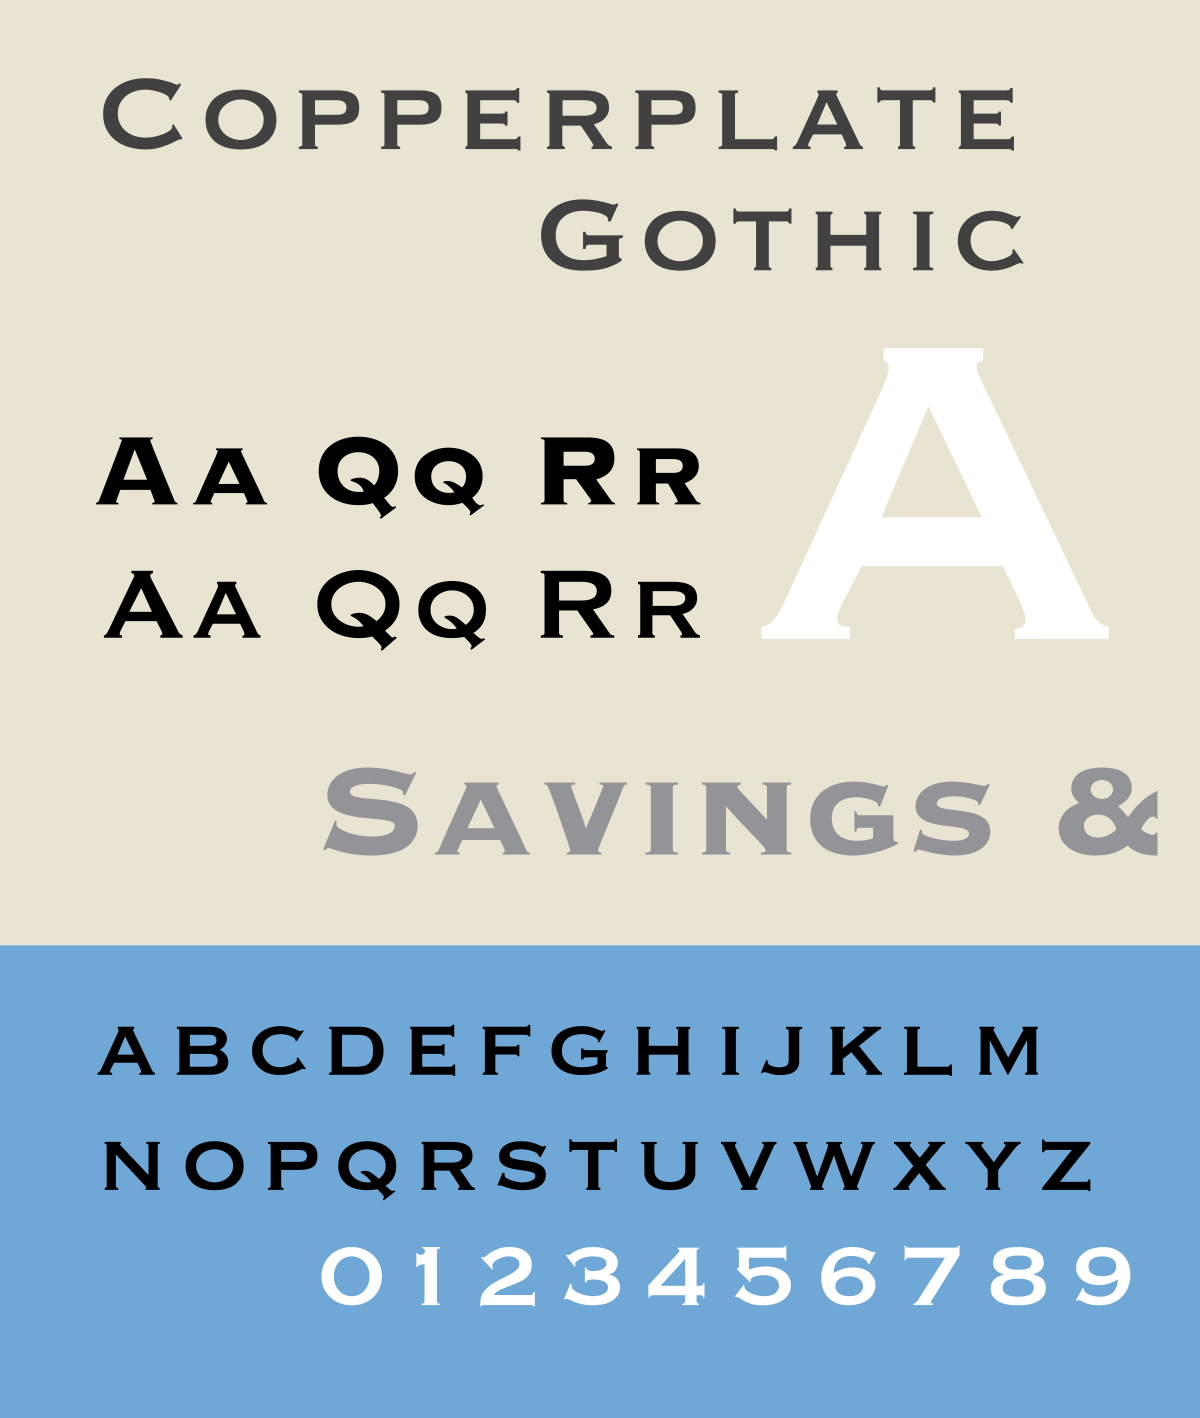 Copperplate Gothic